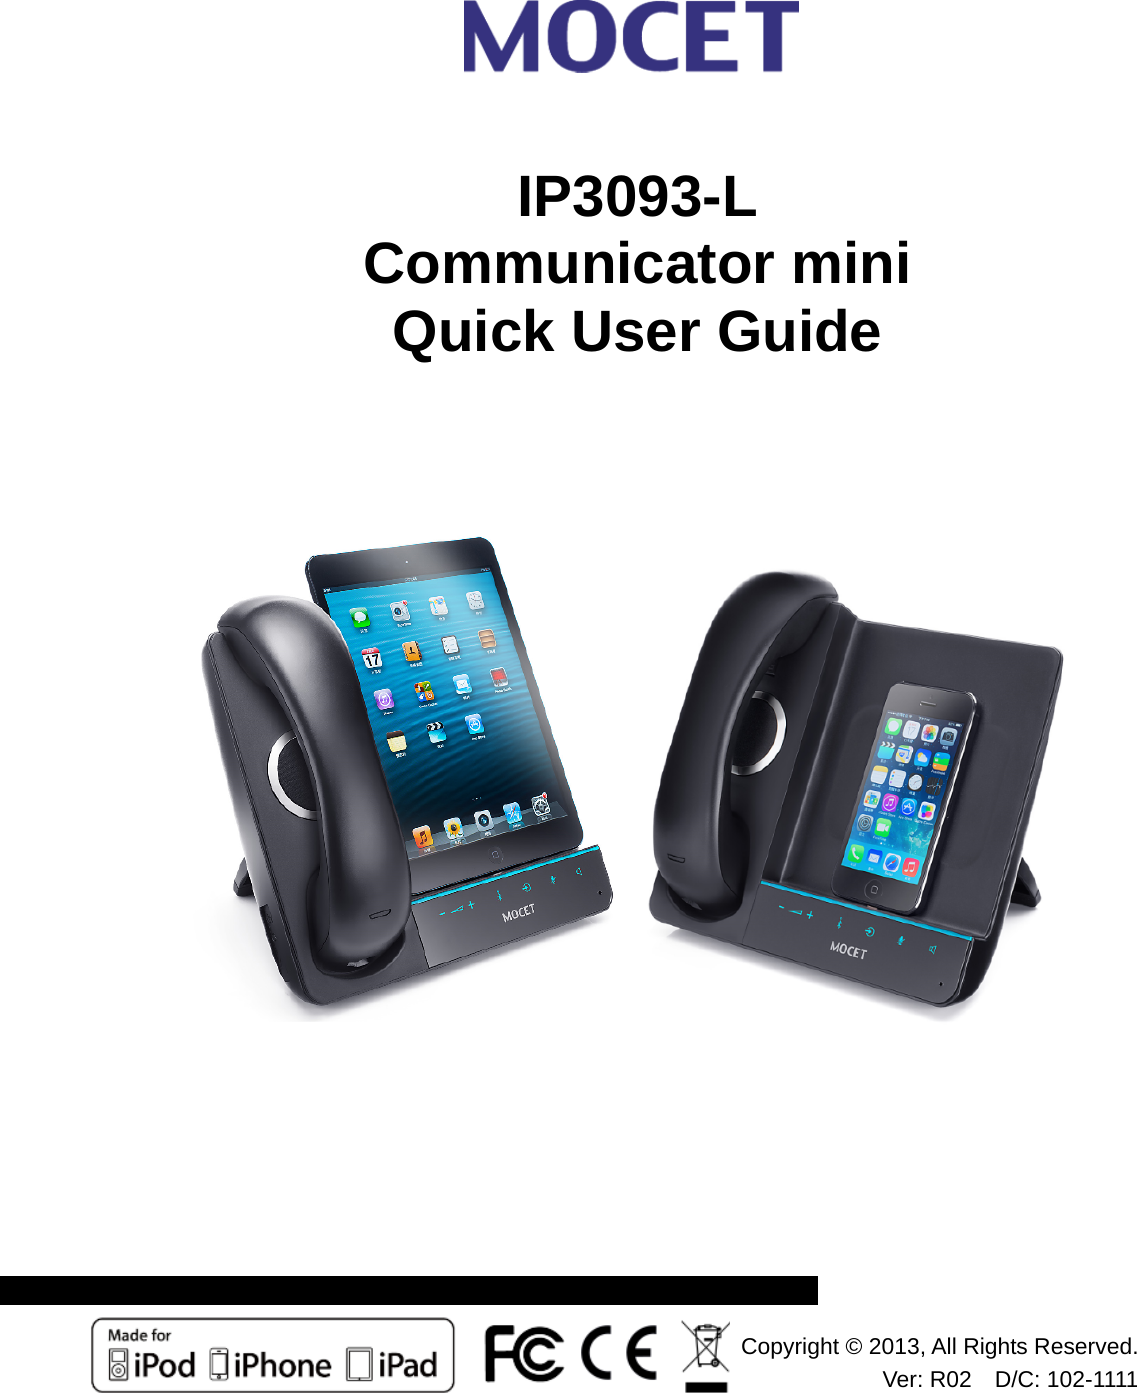                      IP3093-L  Communicator mini Quick User Guide  Copyright © 2013, All Rights Reserved.Ver: R02  D/C: 102-1111